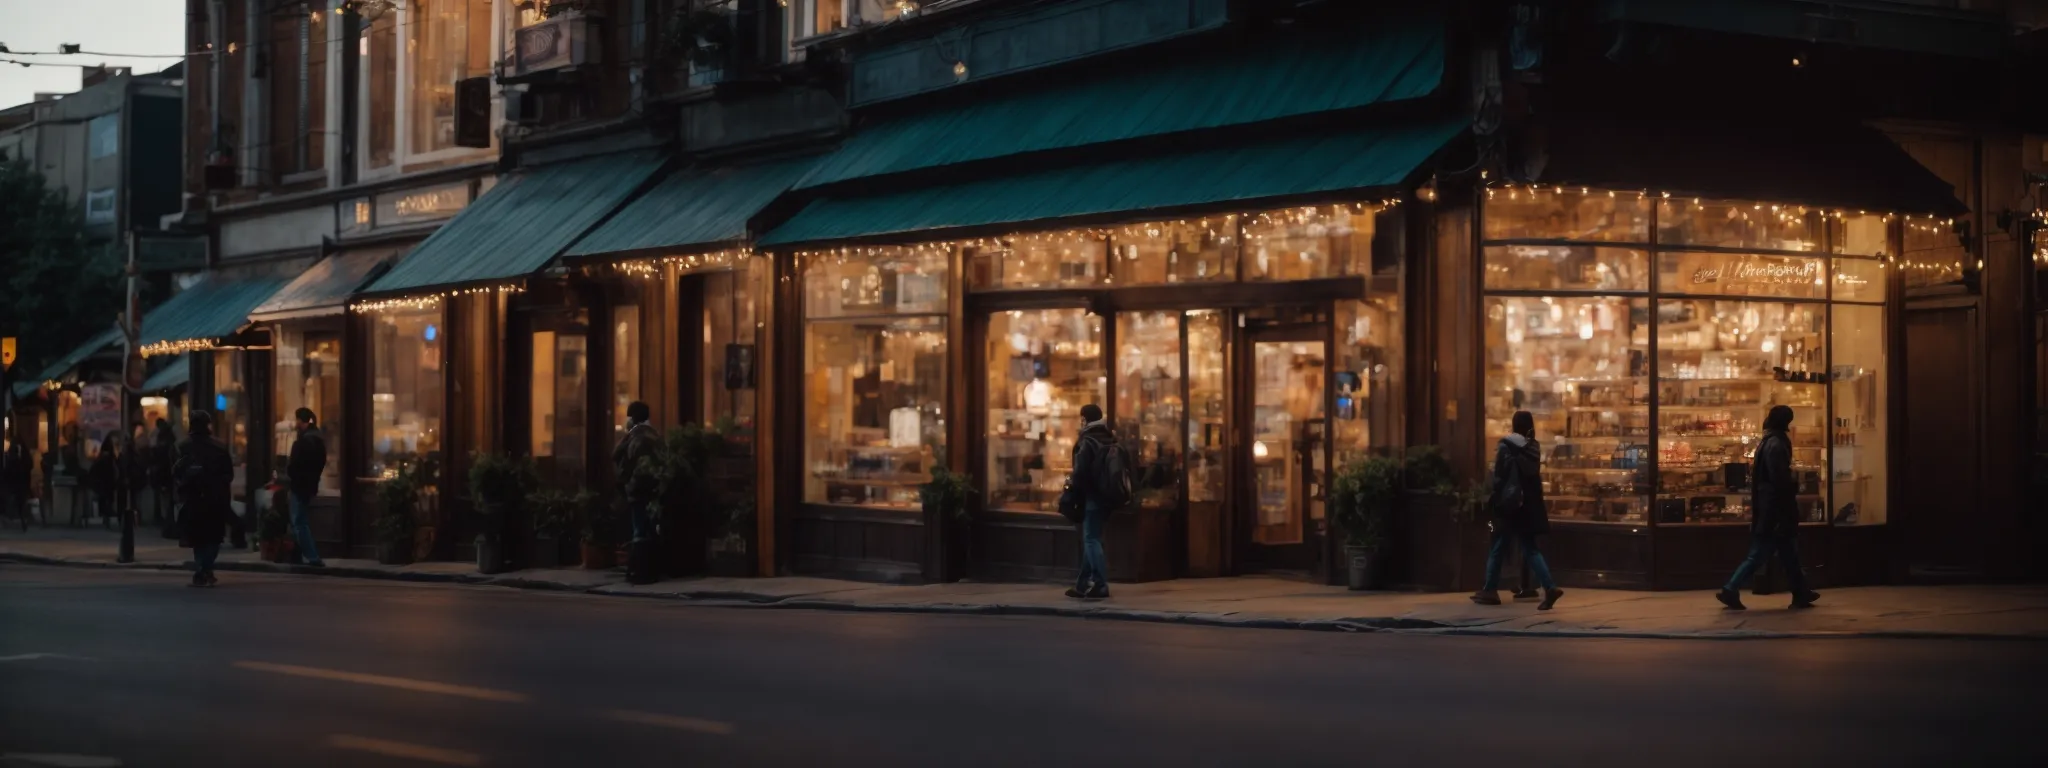 an image of a lit-up storefront on a bustling street at dusk, symbolizing a successful local business presence.